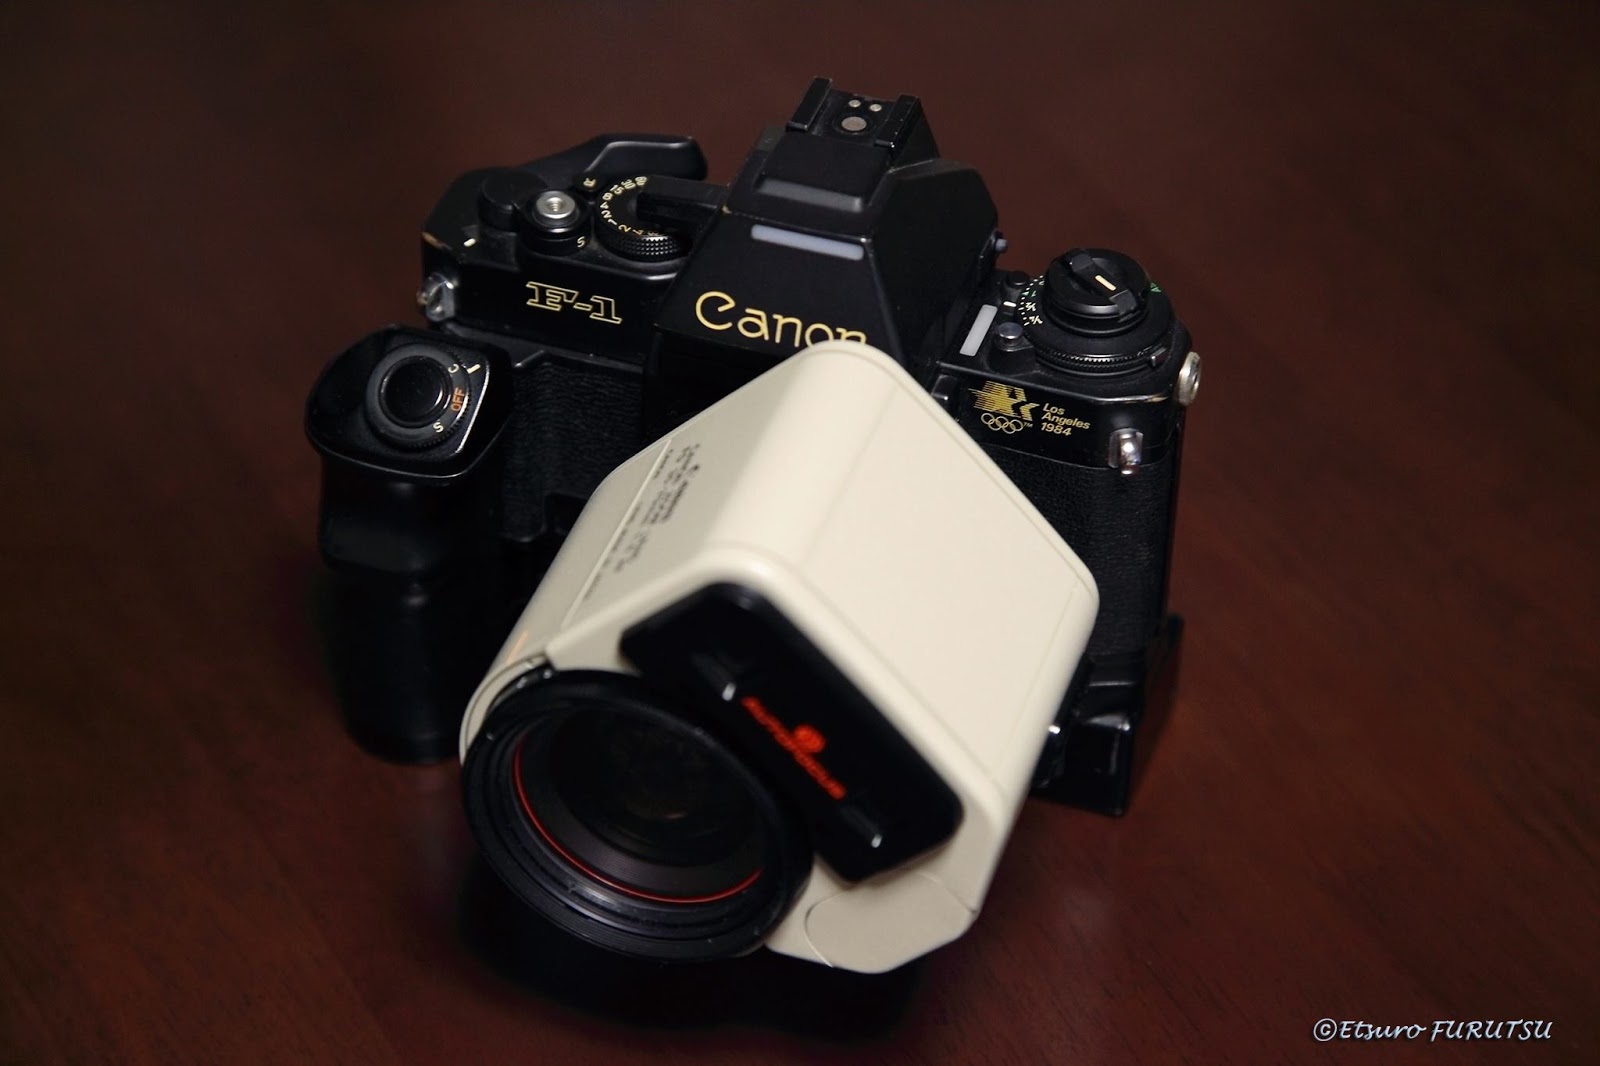 Canon New F-1 - 1981年発売 | Photo of the Life